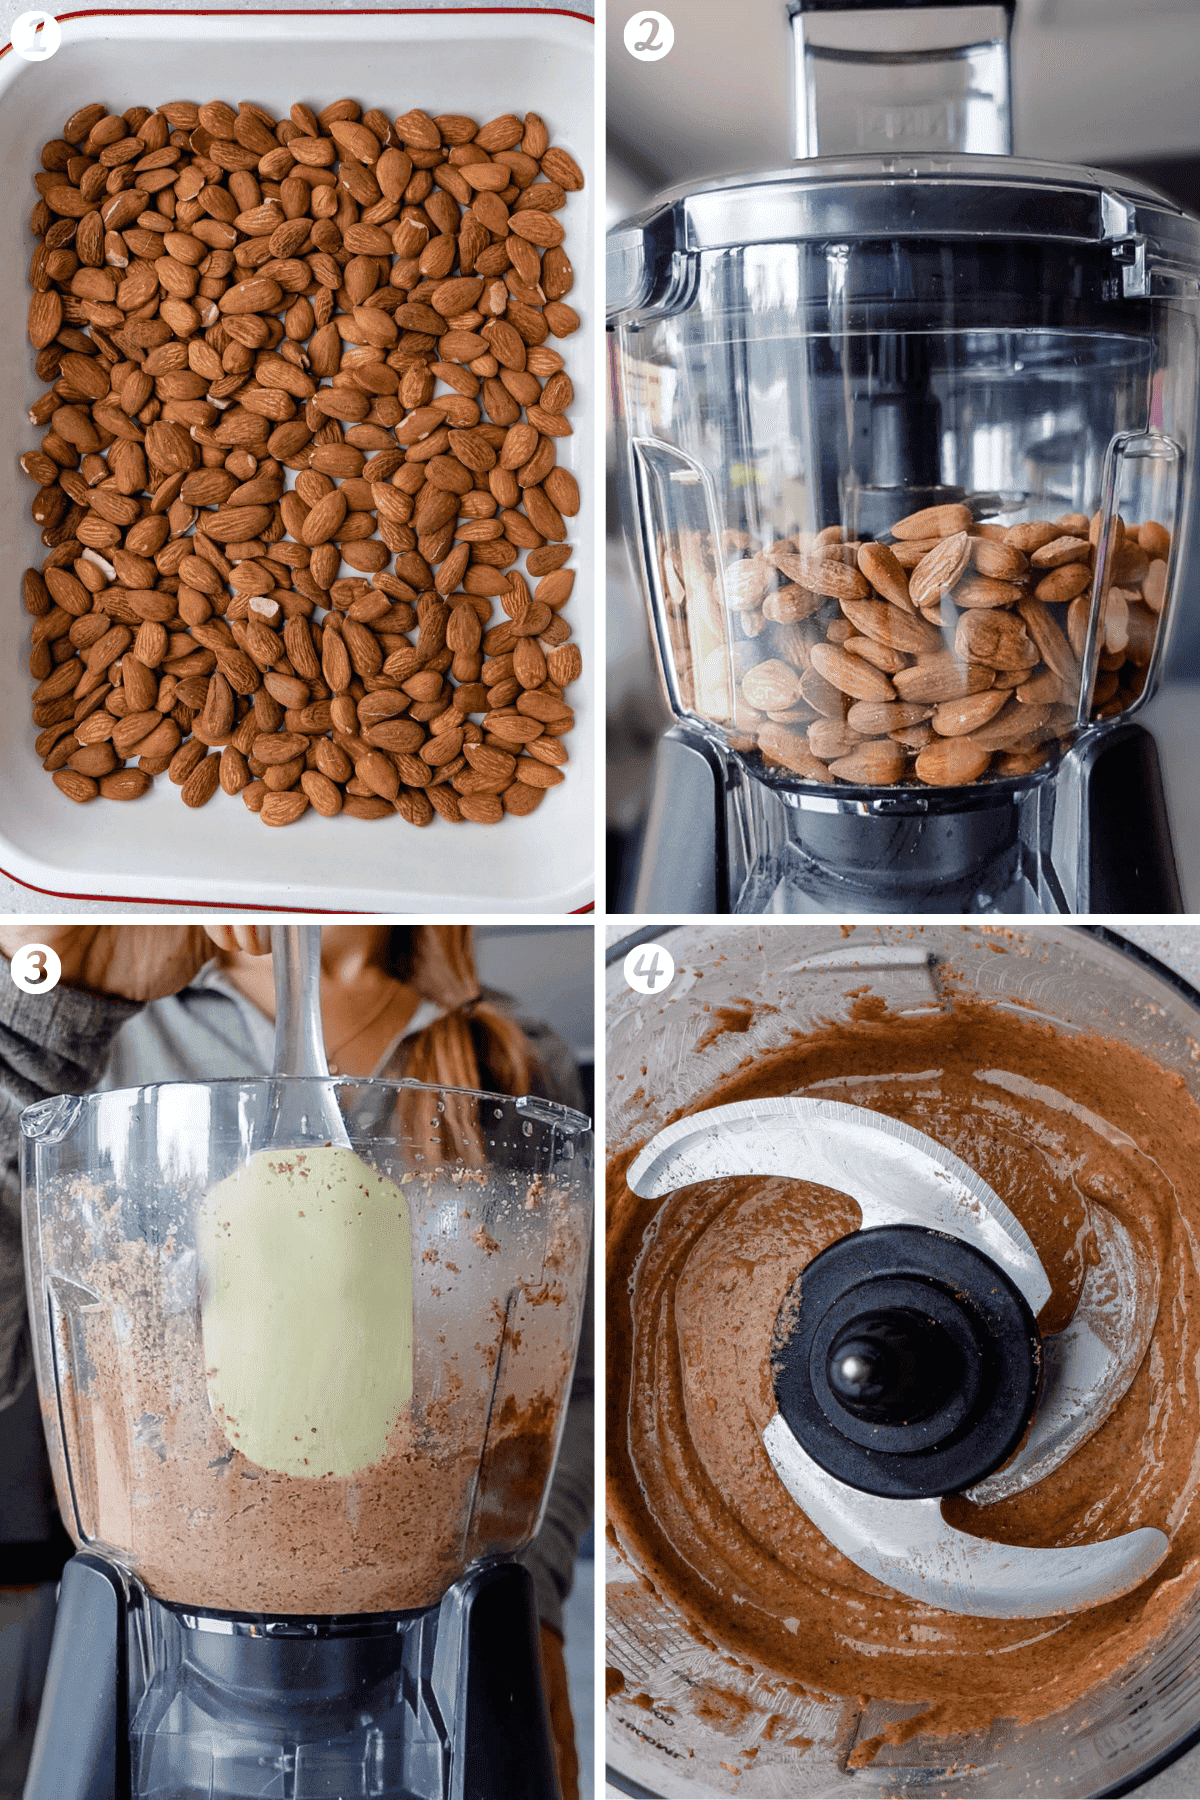 Almond butter recipe and steps on how to make it